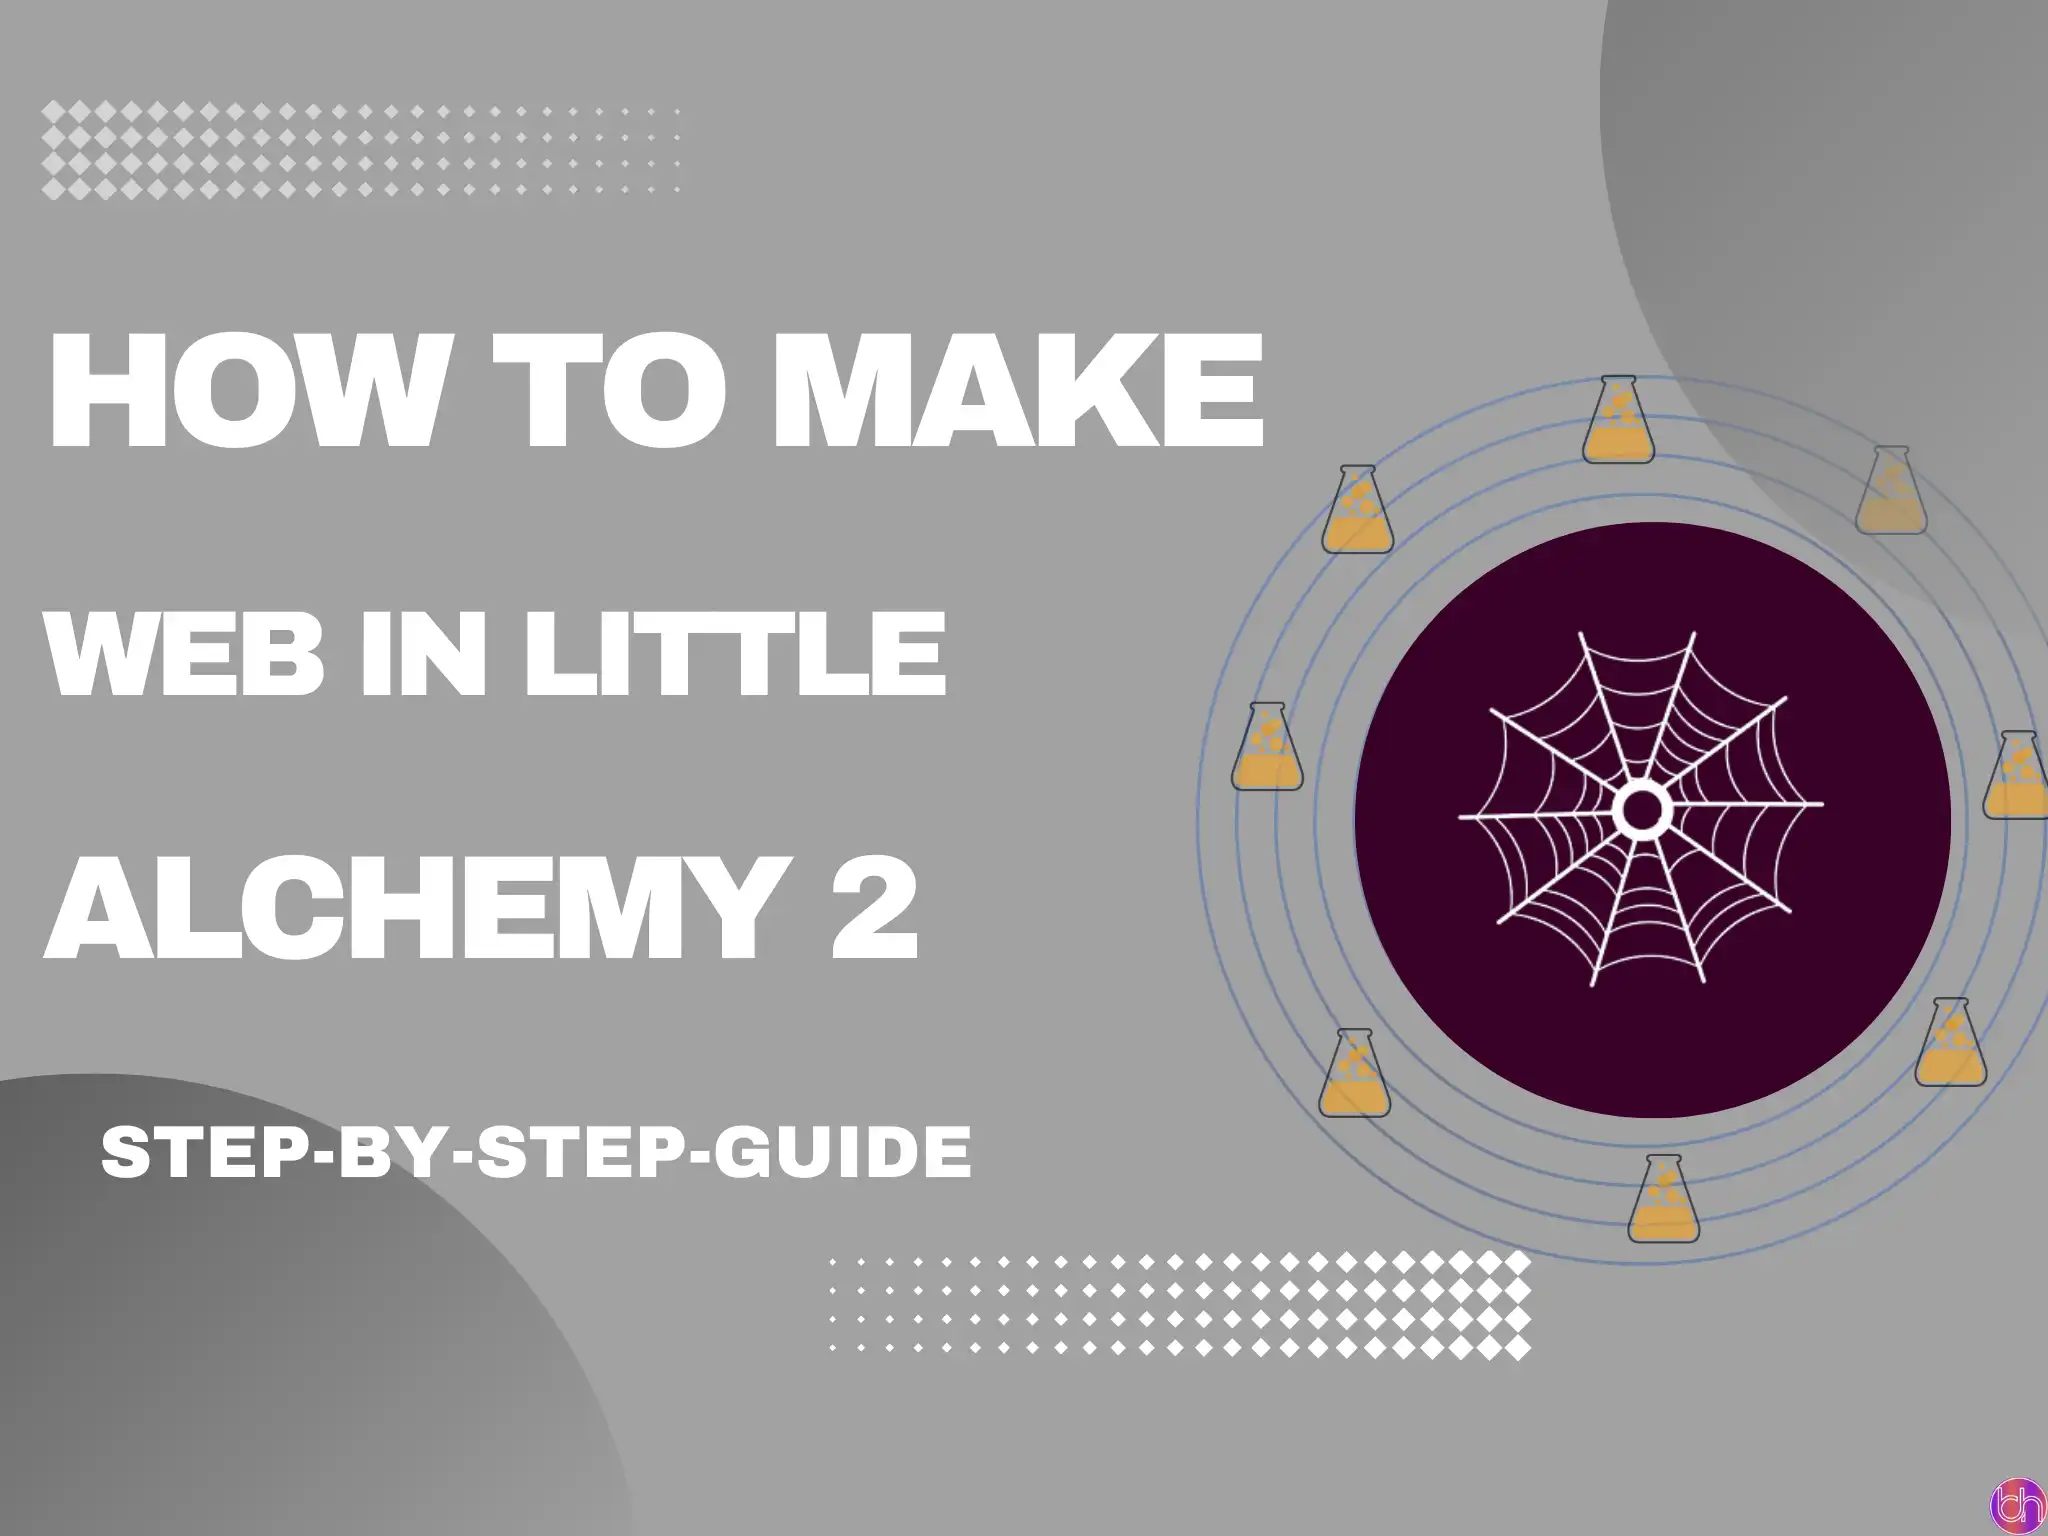 How to make Web in Little Alchemy 2